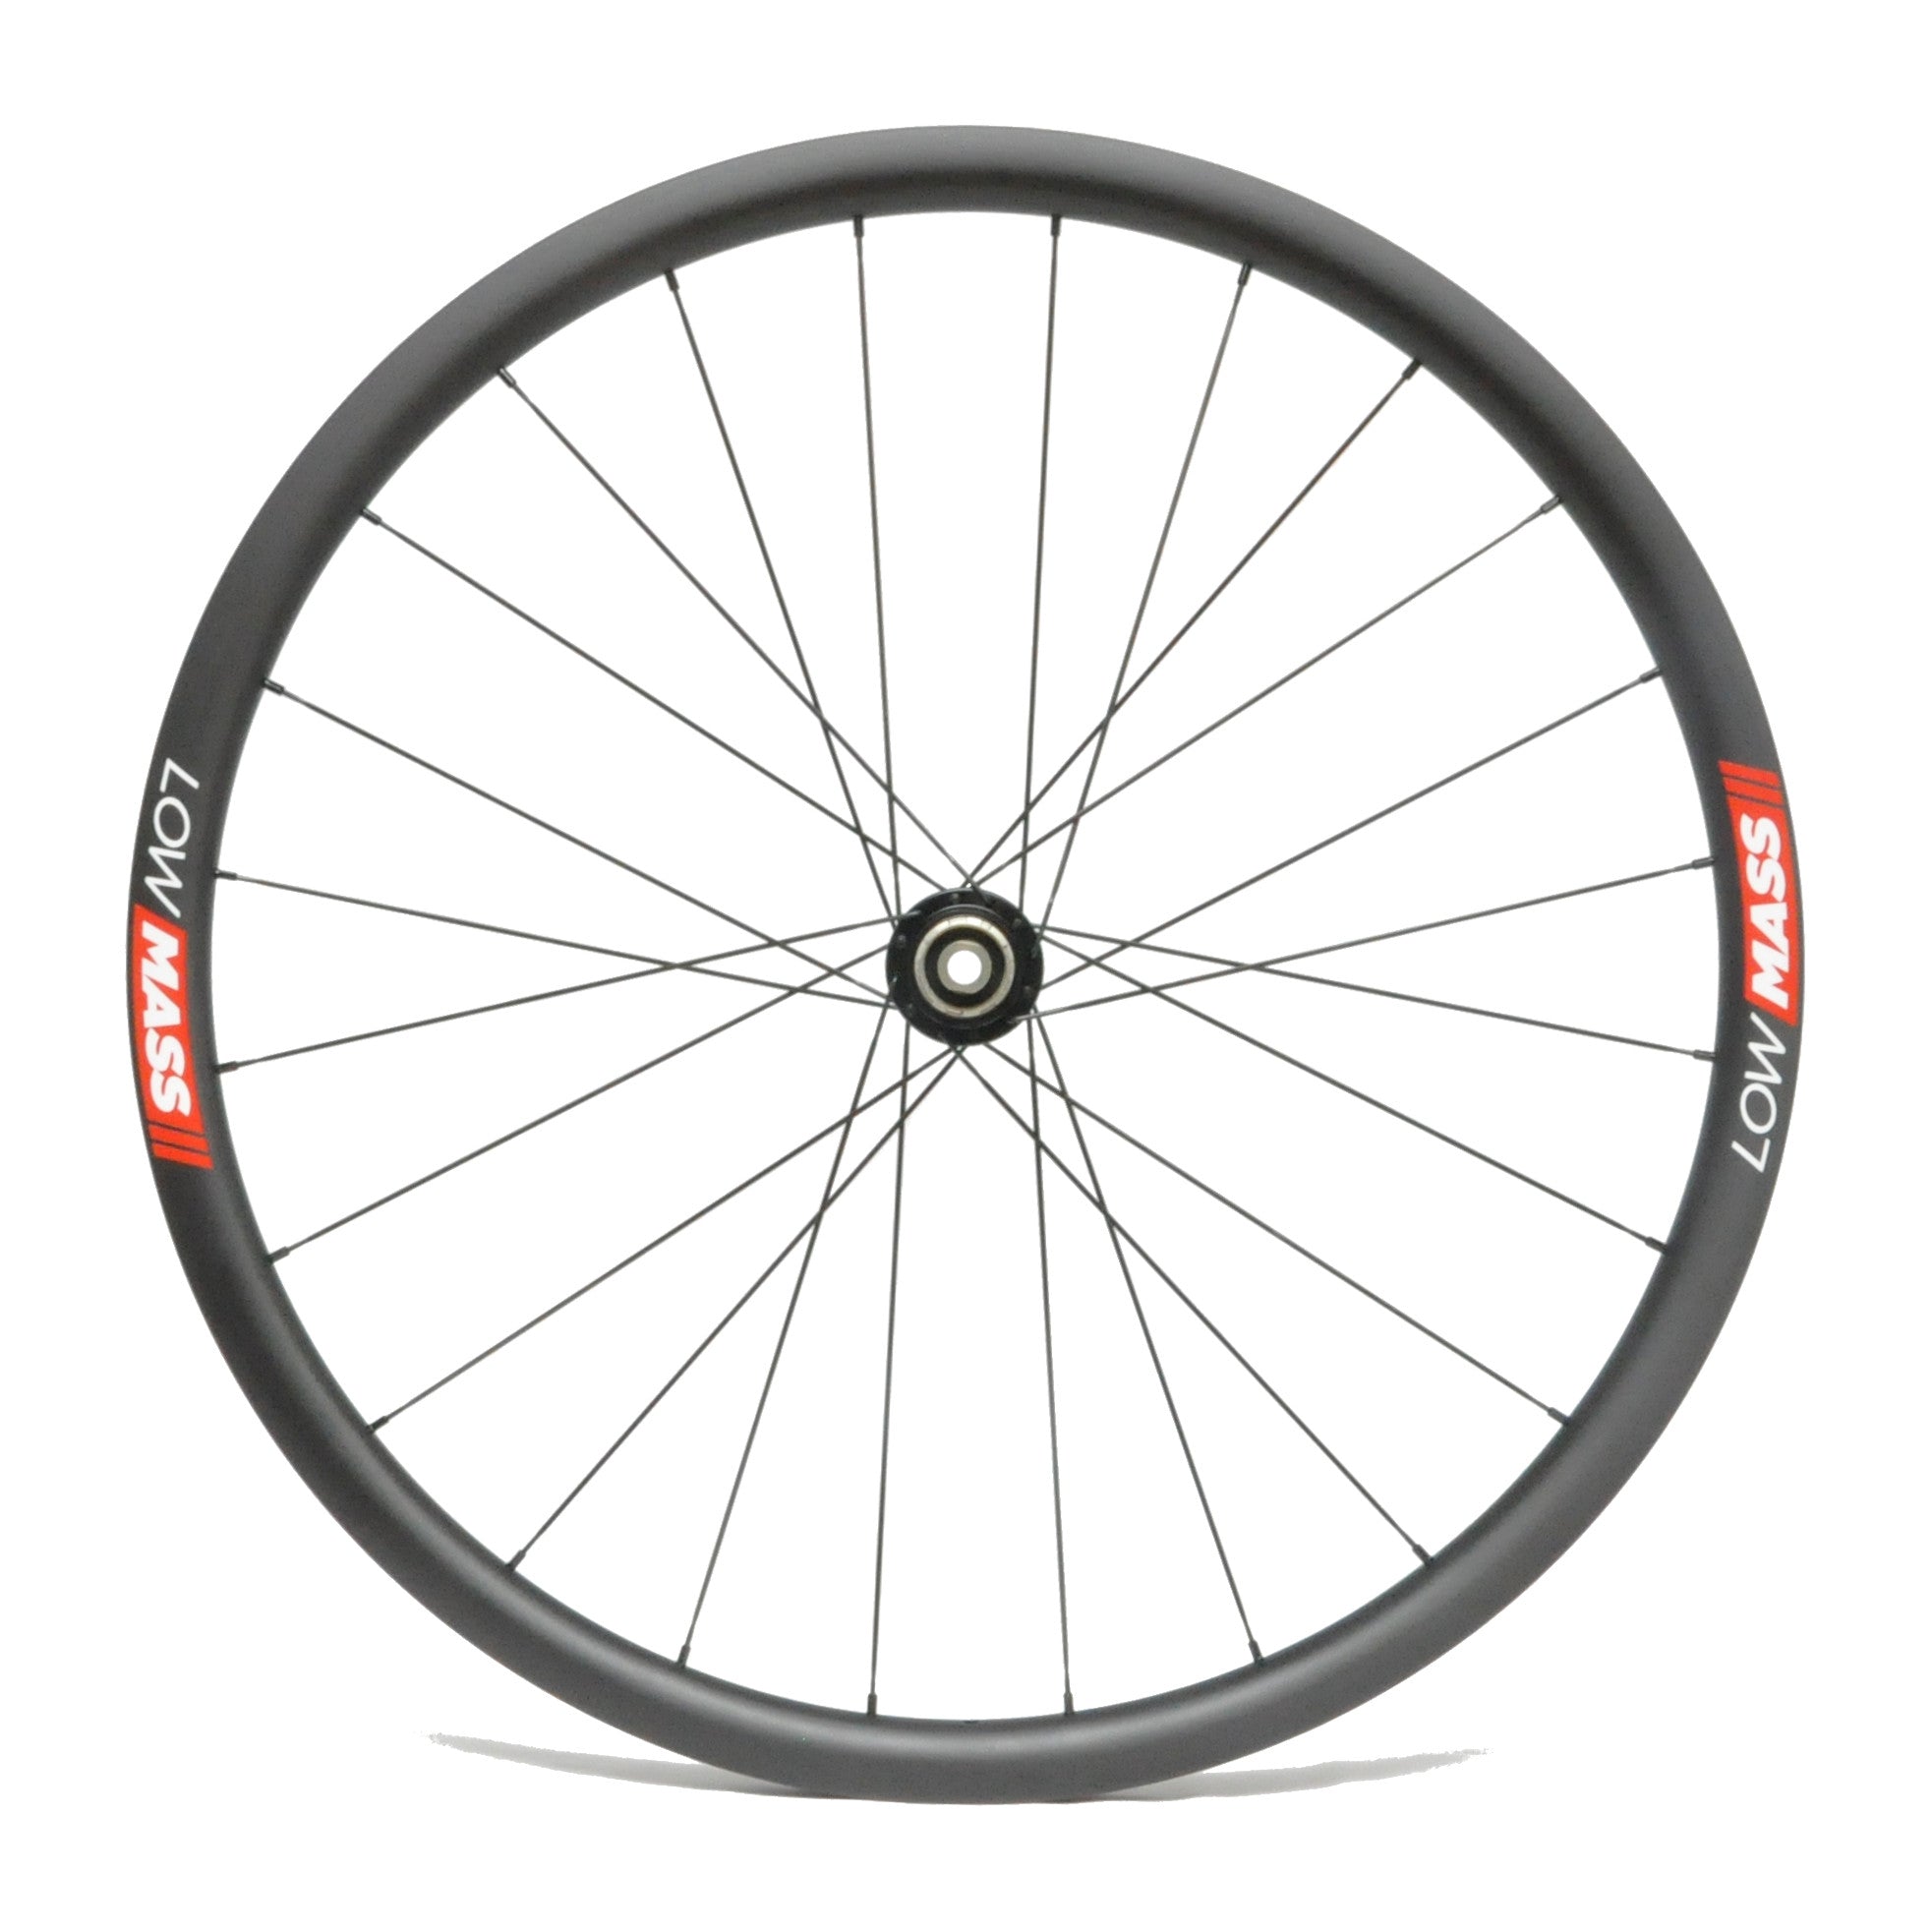 LOWMASS Multi-Purpose Carbon Tubeless Disc Wheelset (With SL option)